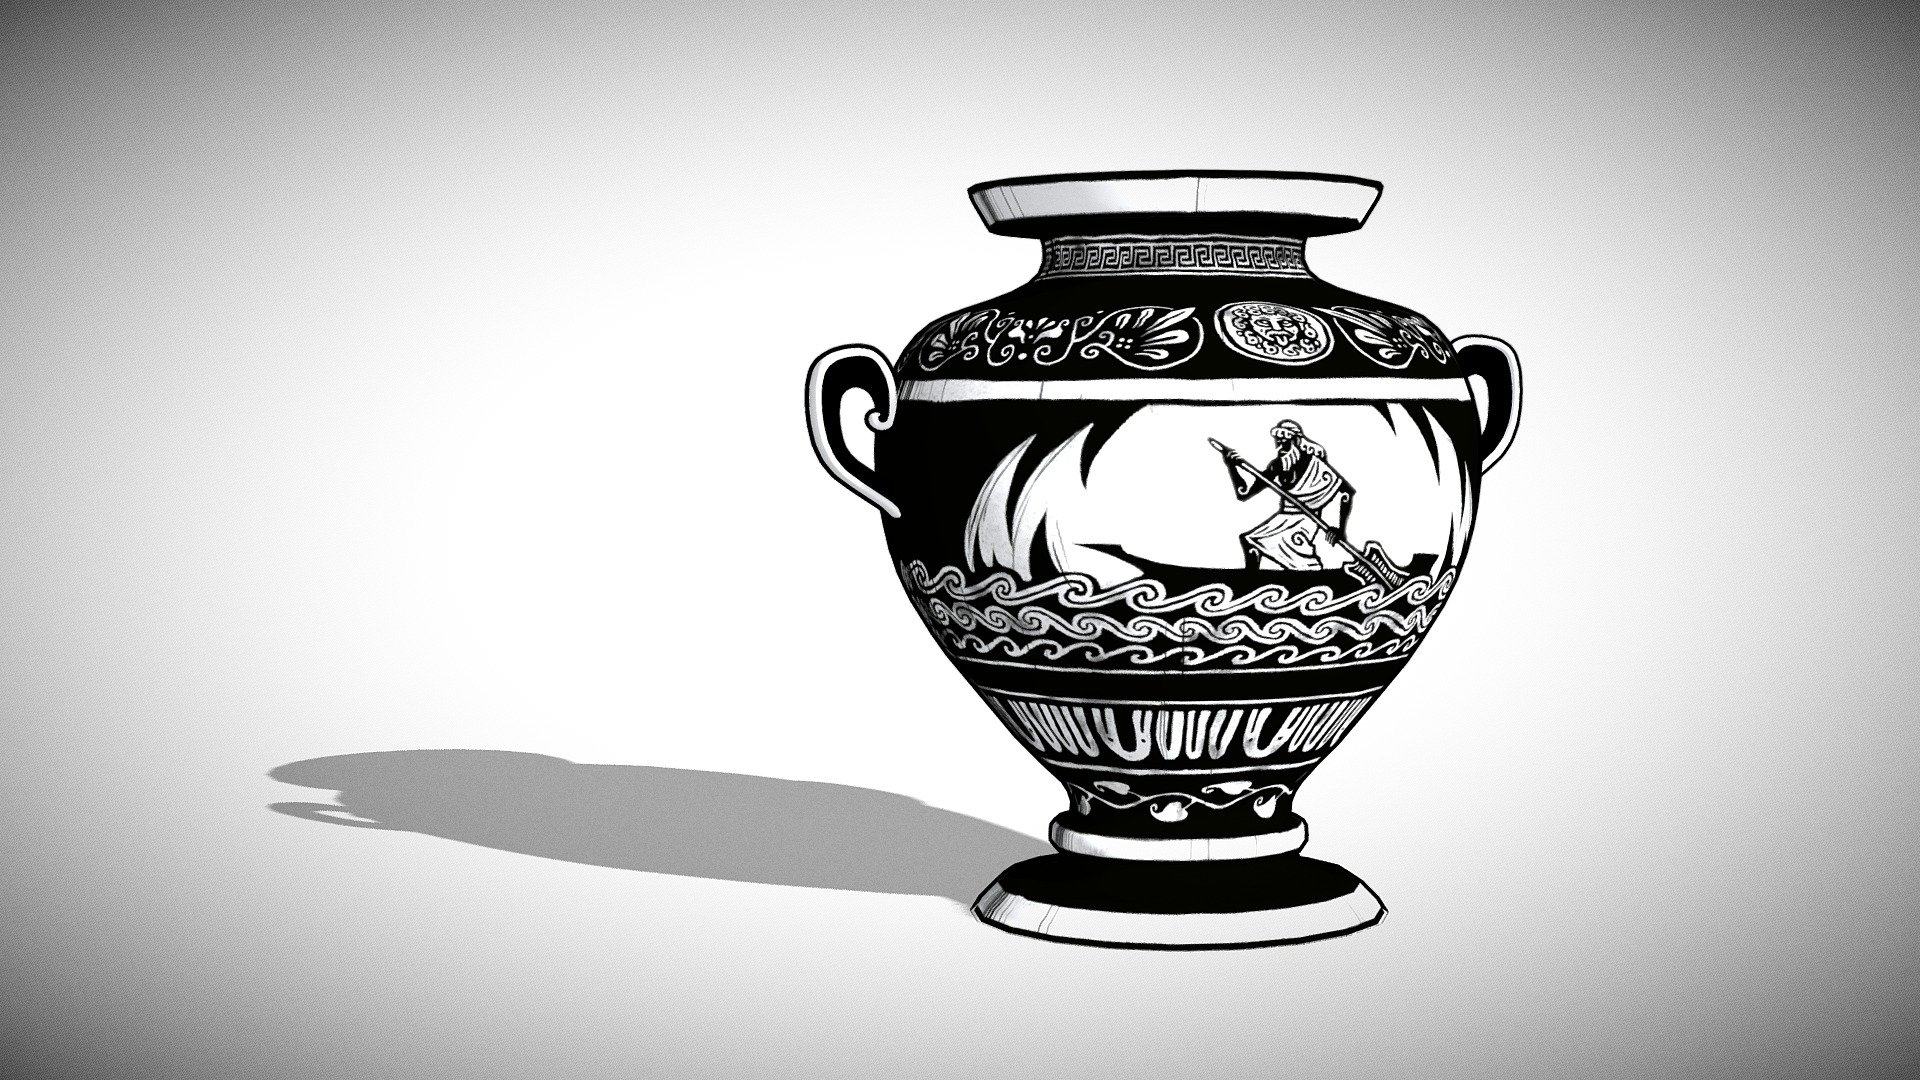 Charon's vase - based on an old inktober drawing